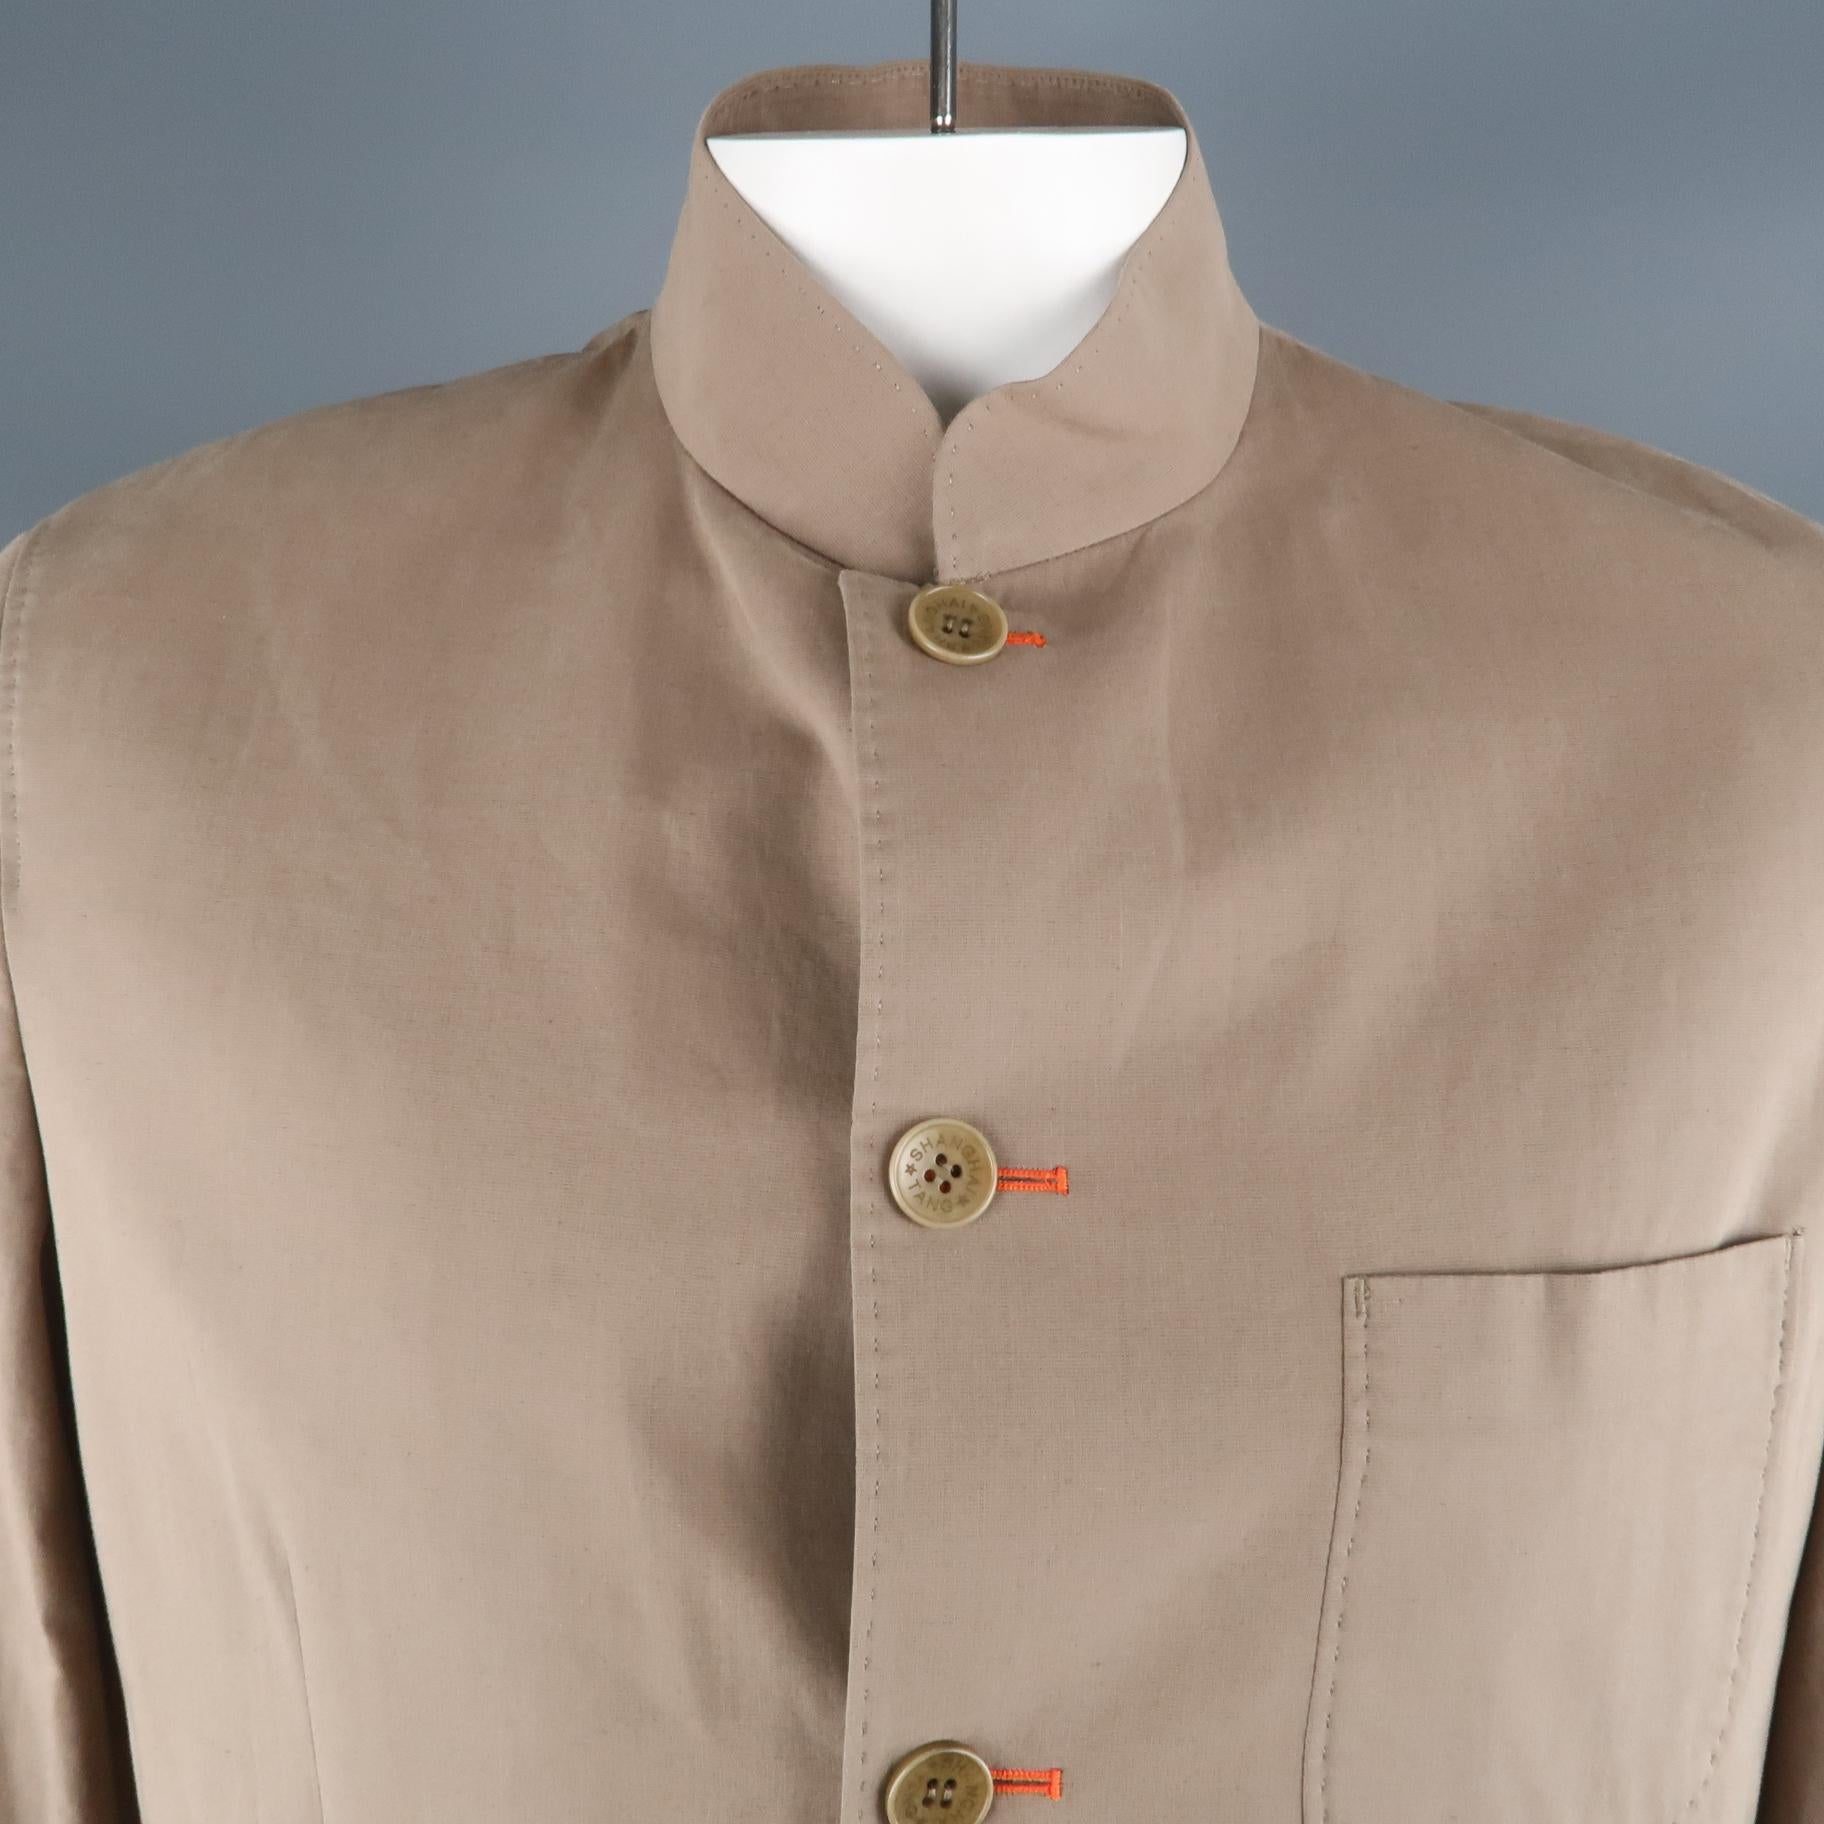 SHANGHAI TANG jacket comes in a khaki cotton featuring a nehru collar, buttoned closure, and flap pockets.
Retailed at $1200

Excellent Pre-Owned Condition.
Marked: 42
 
Measurements:
 
Shoulder: 19.5 in.
Chest: 42 in.
Sleeve: 26 in.
Length: 29.5 in.